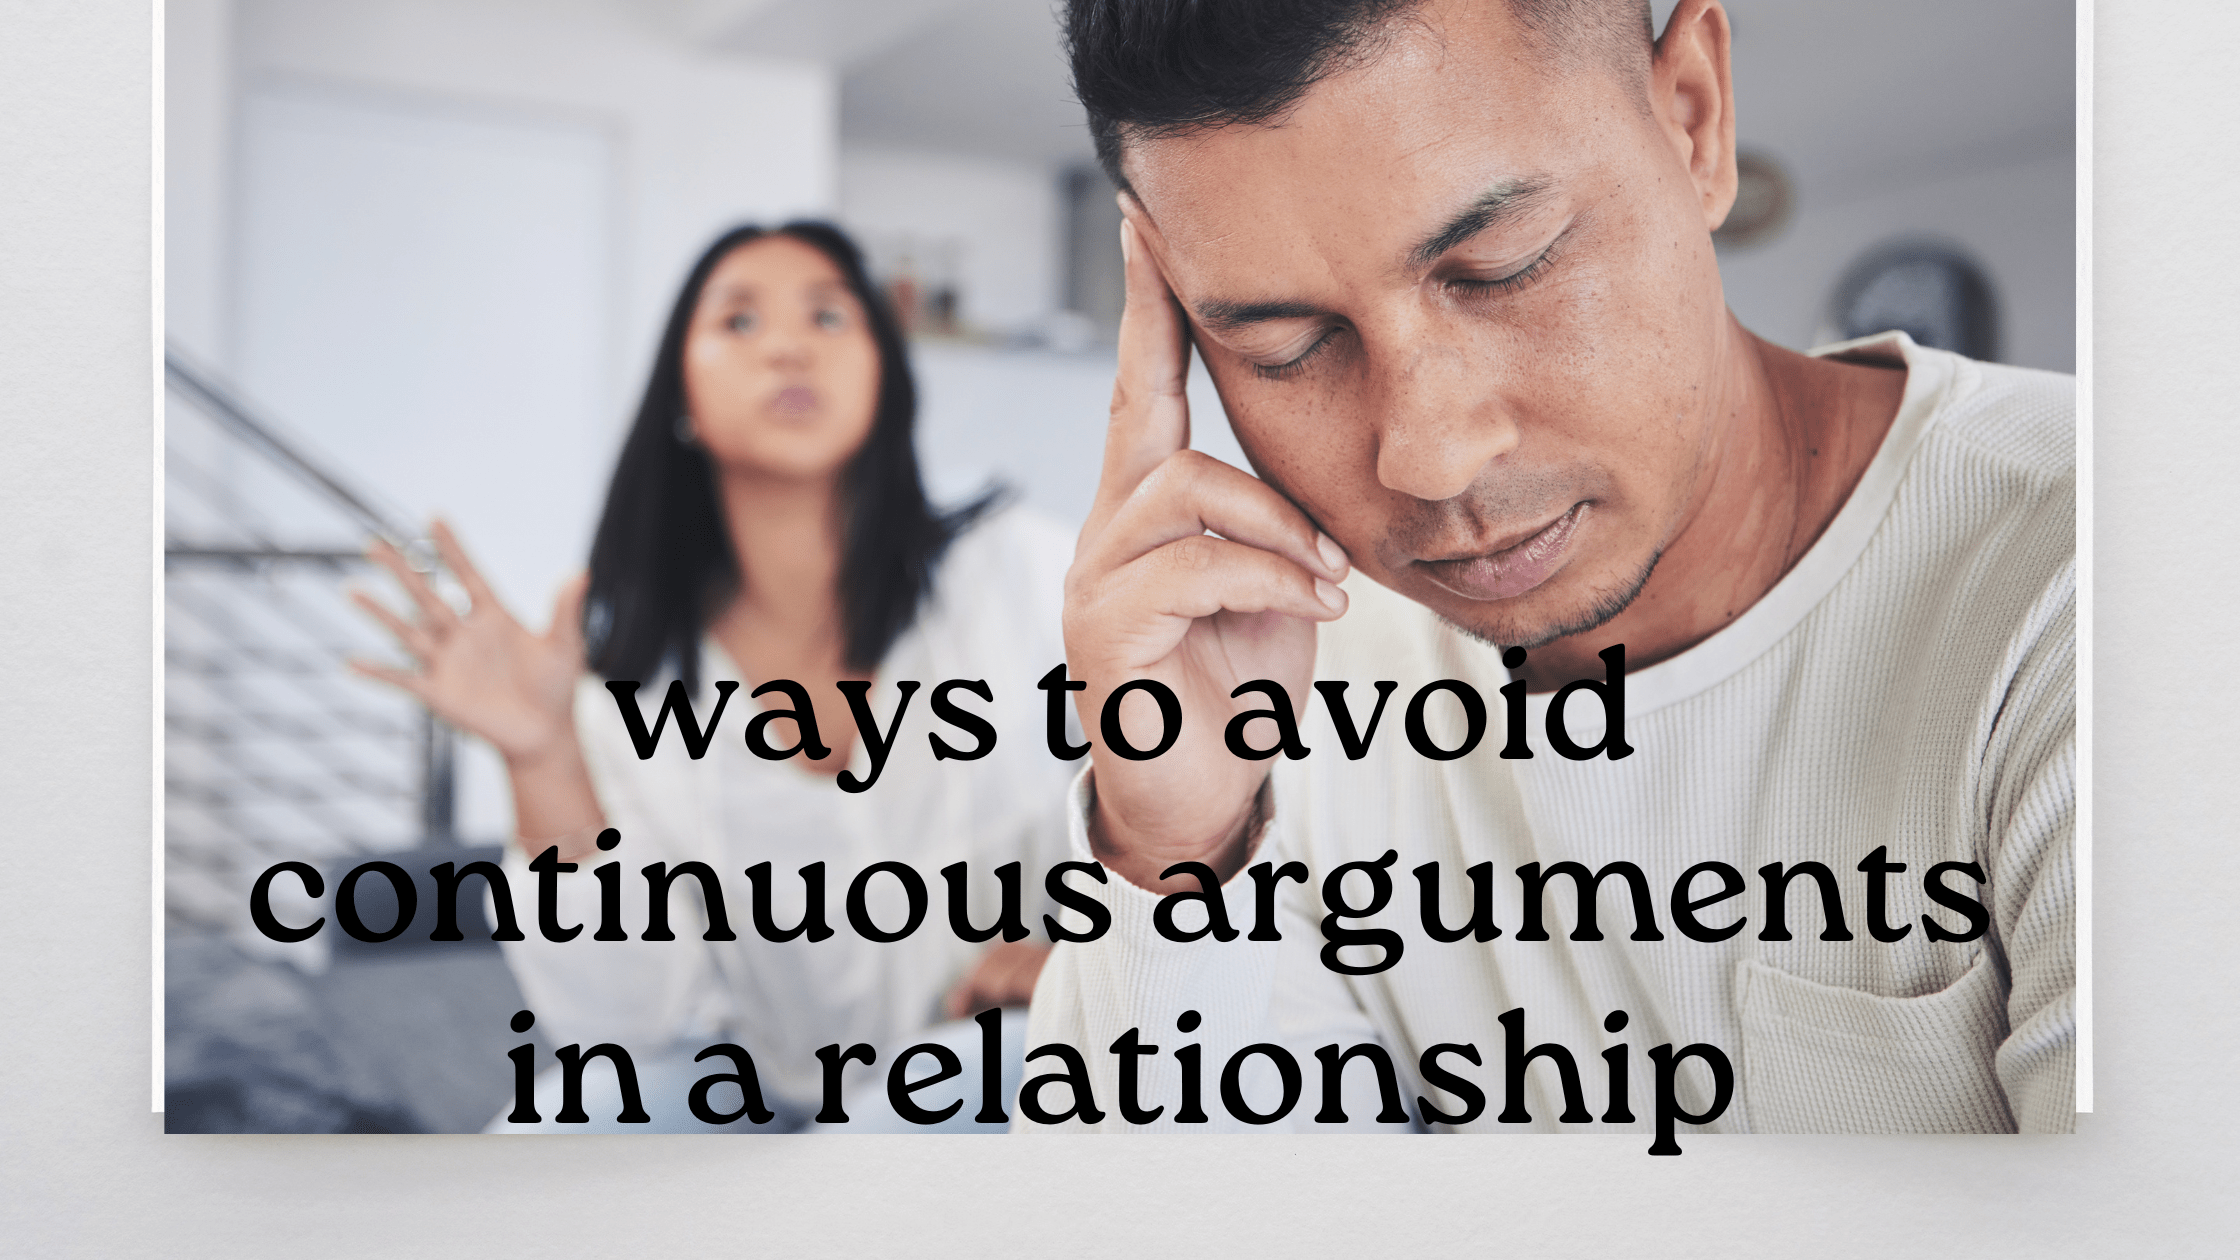 10 easy ways to avoid continuous arguments in a relationship 14